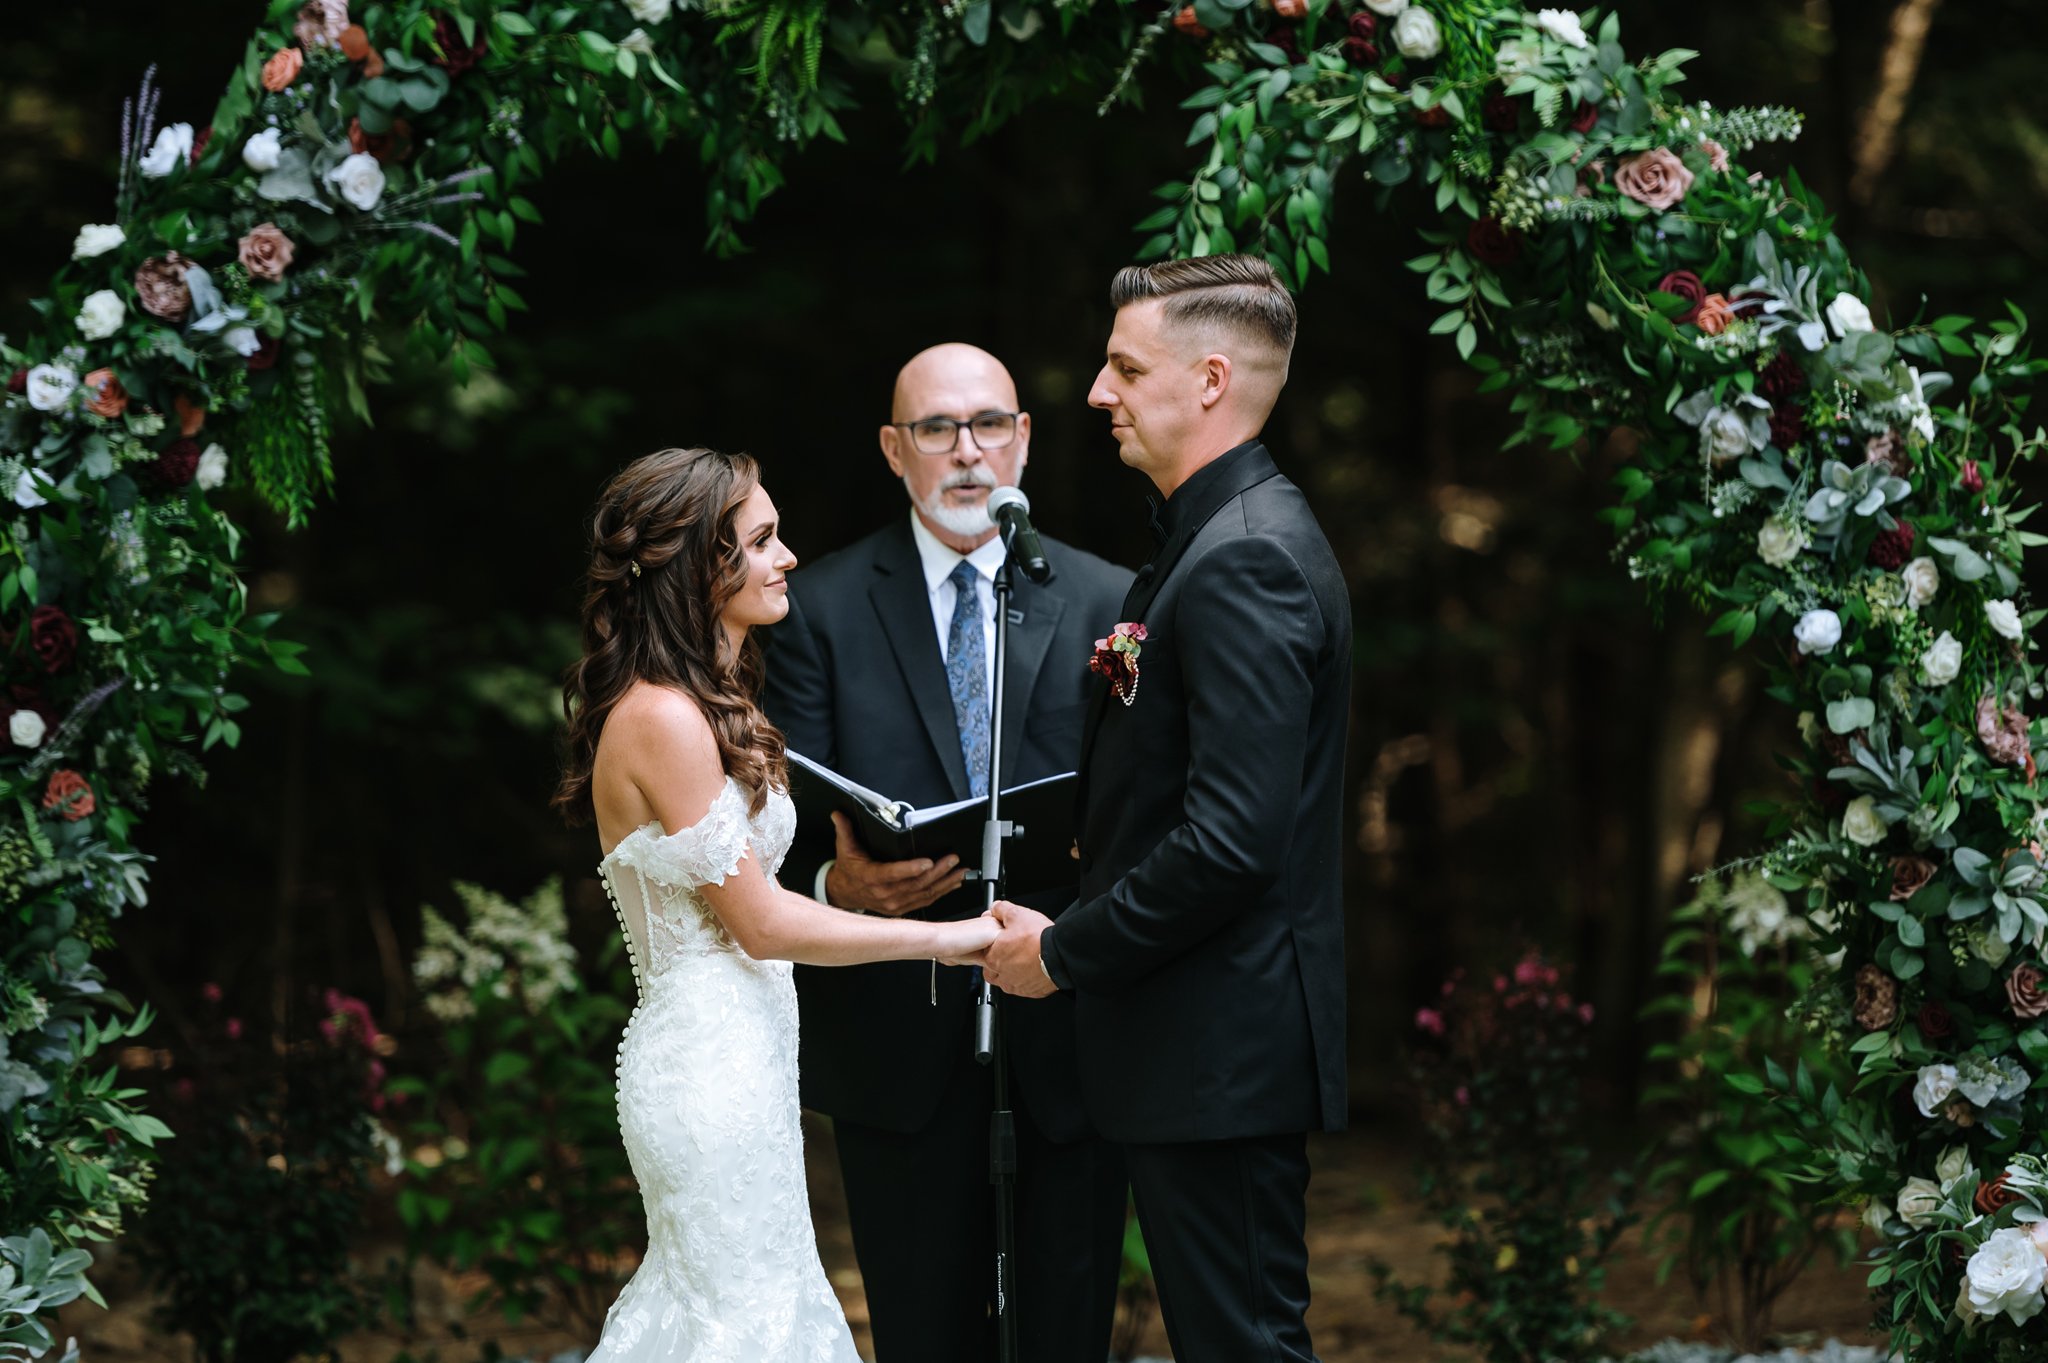 Beauty_and_Life_Captured_Holly_and_Brandon_Wedding-569.jpg